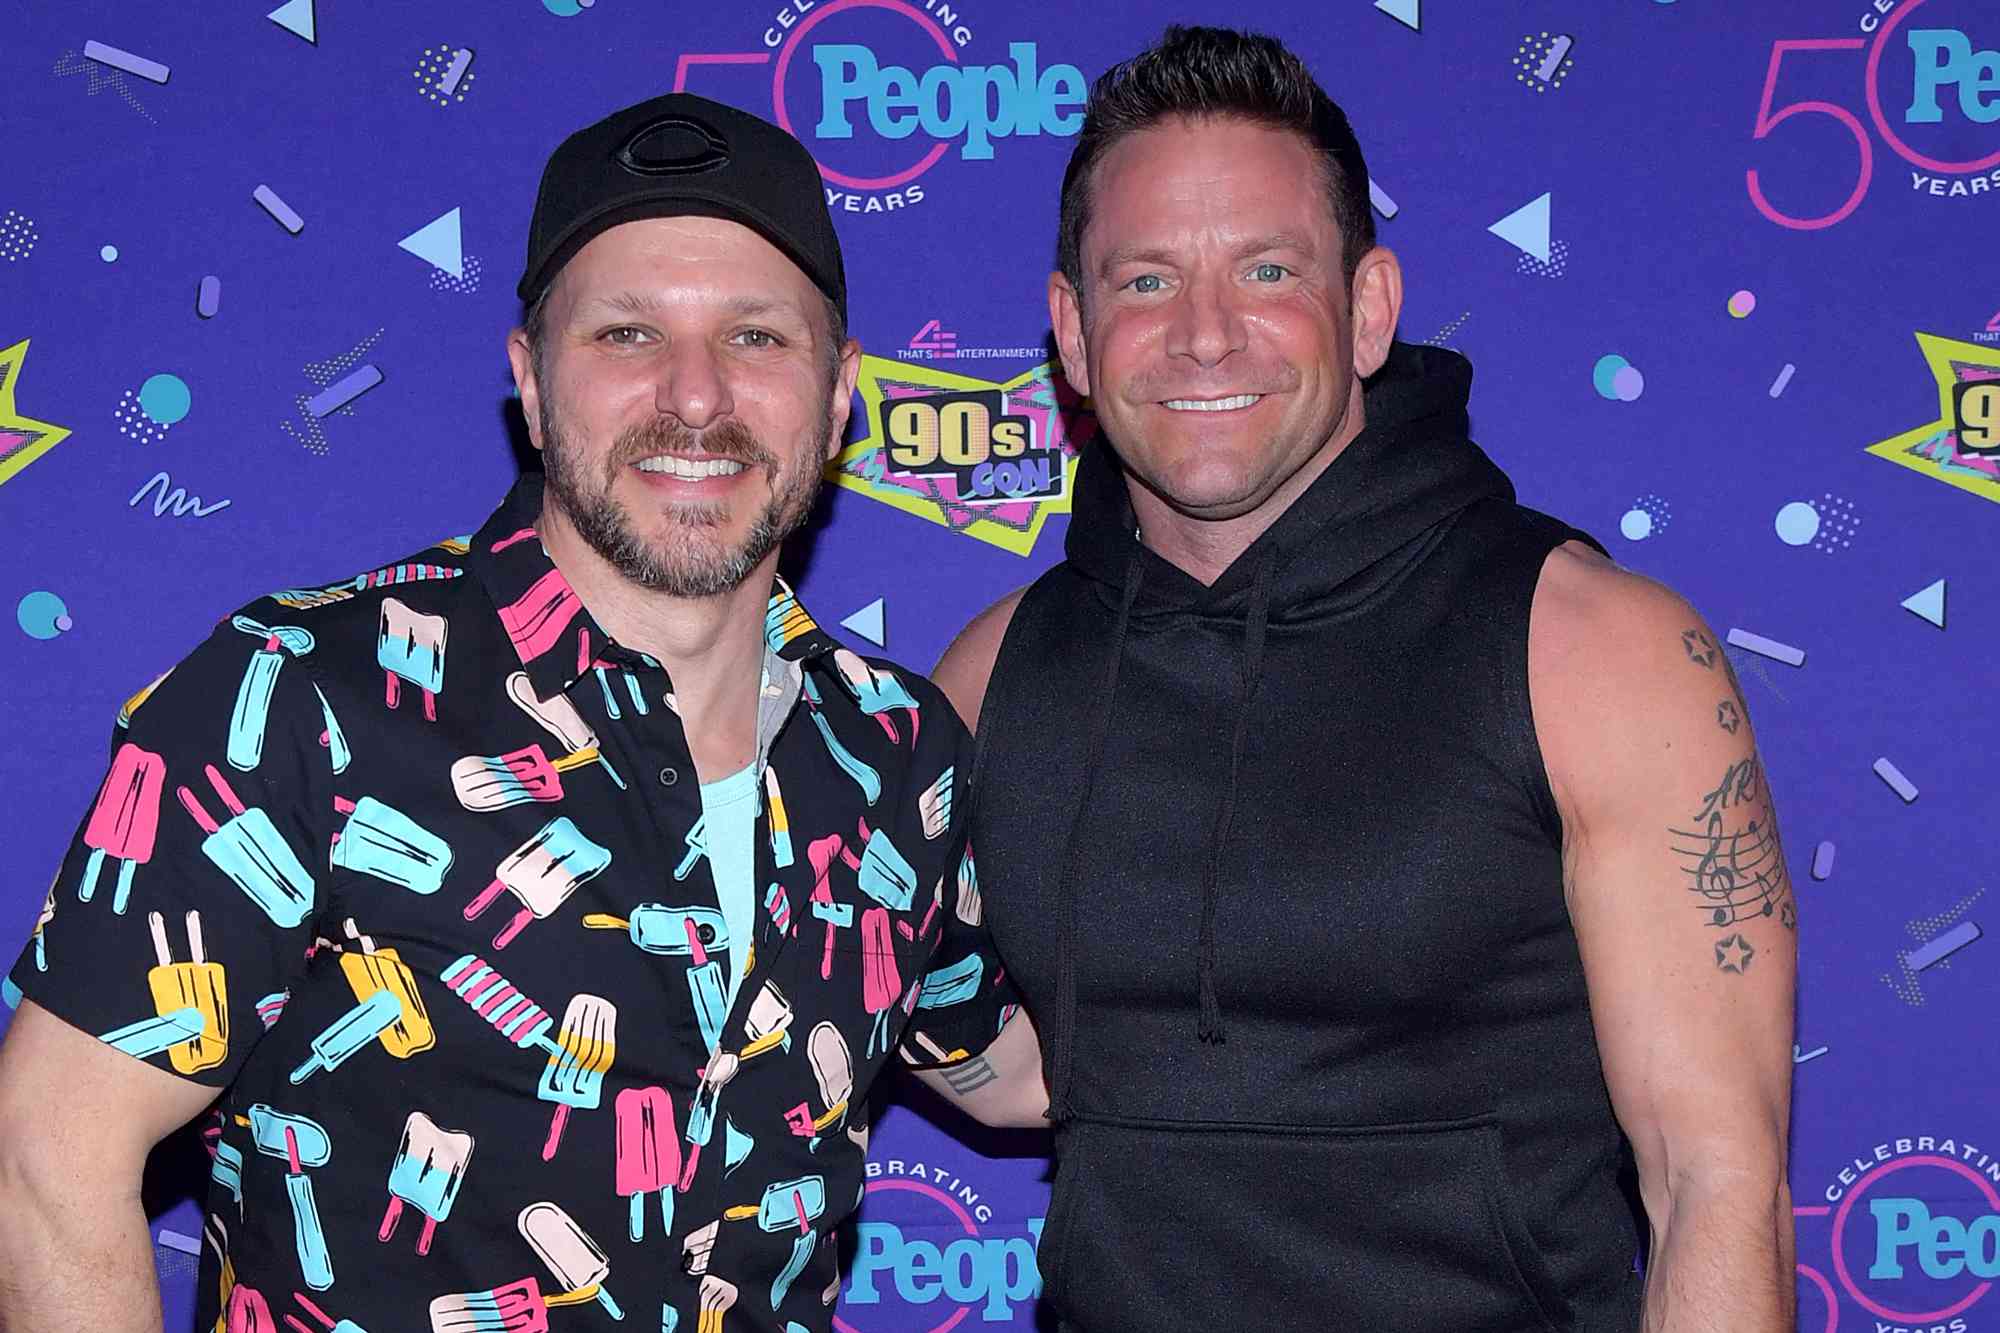 Drew Lachey (L) and Jeff Timmons